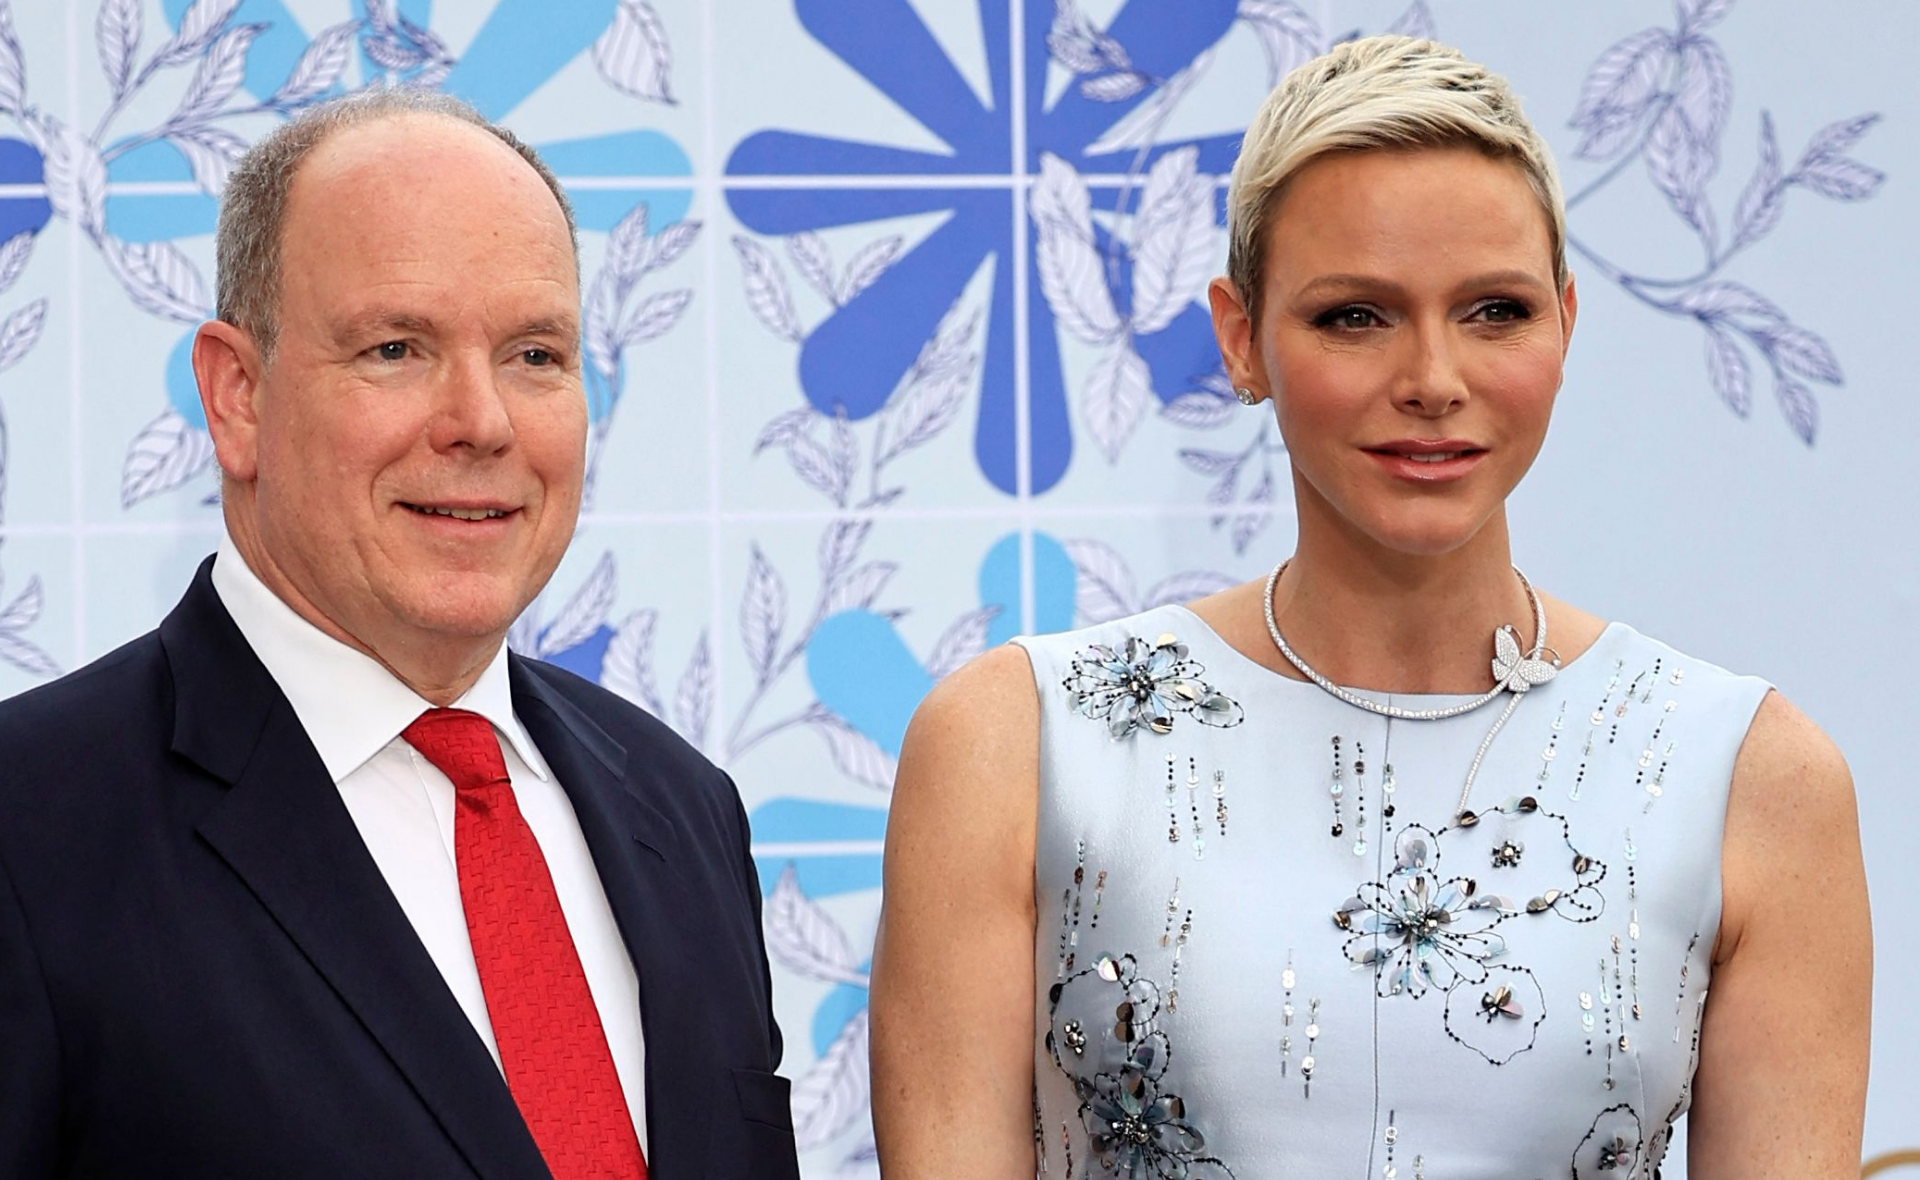 A vision in ice blue: Princess Charlene of Monaco’s ballgown steals the show at her latest gala appearance